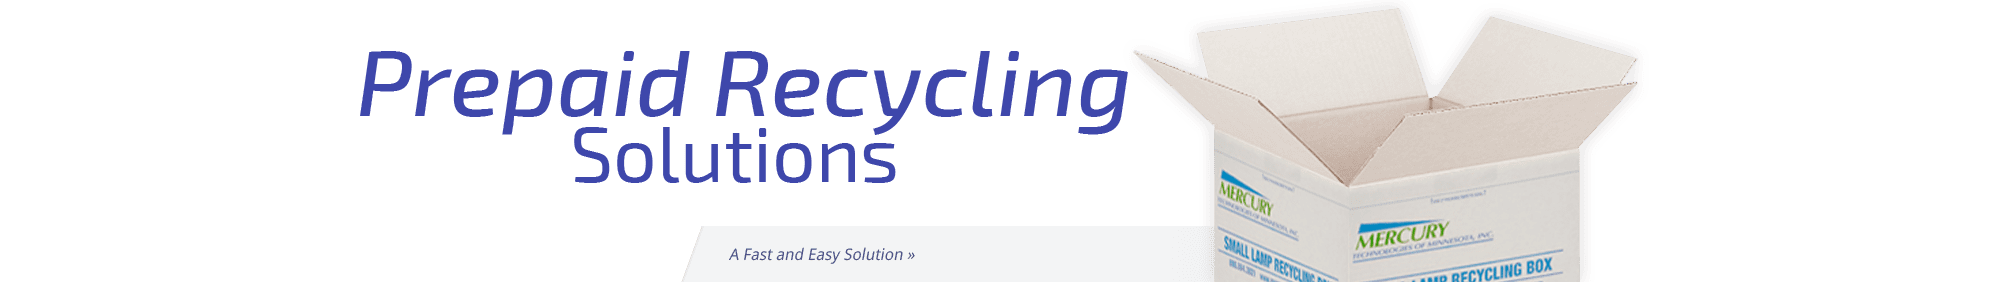 Prepaid recycling solutions